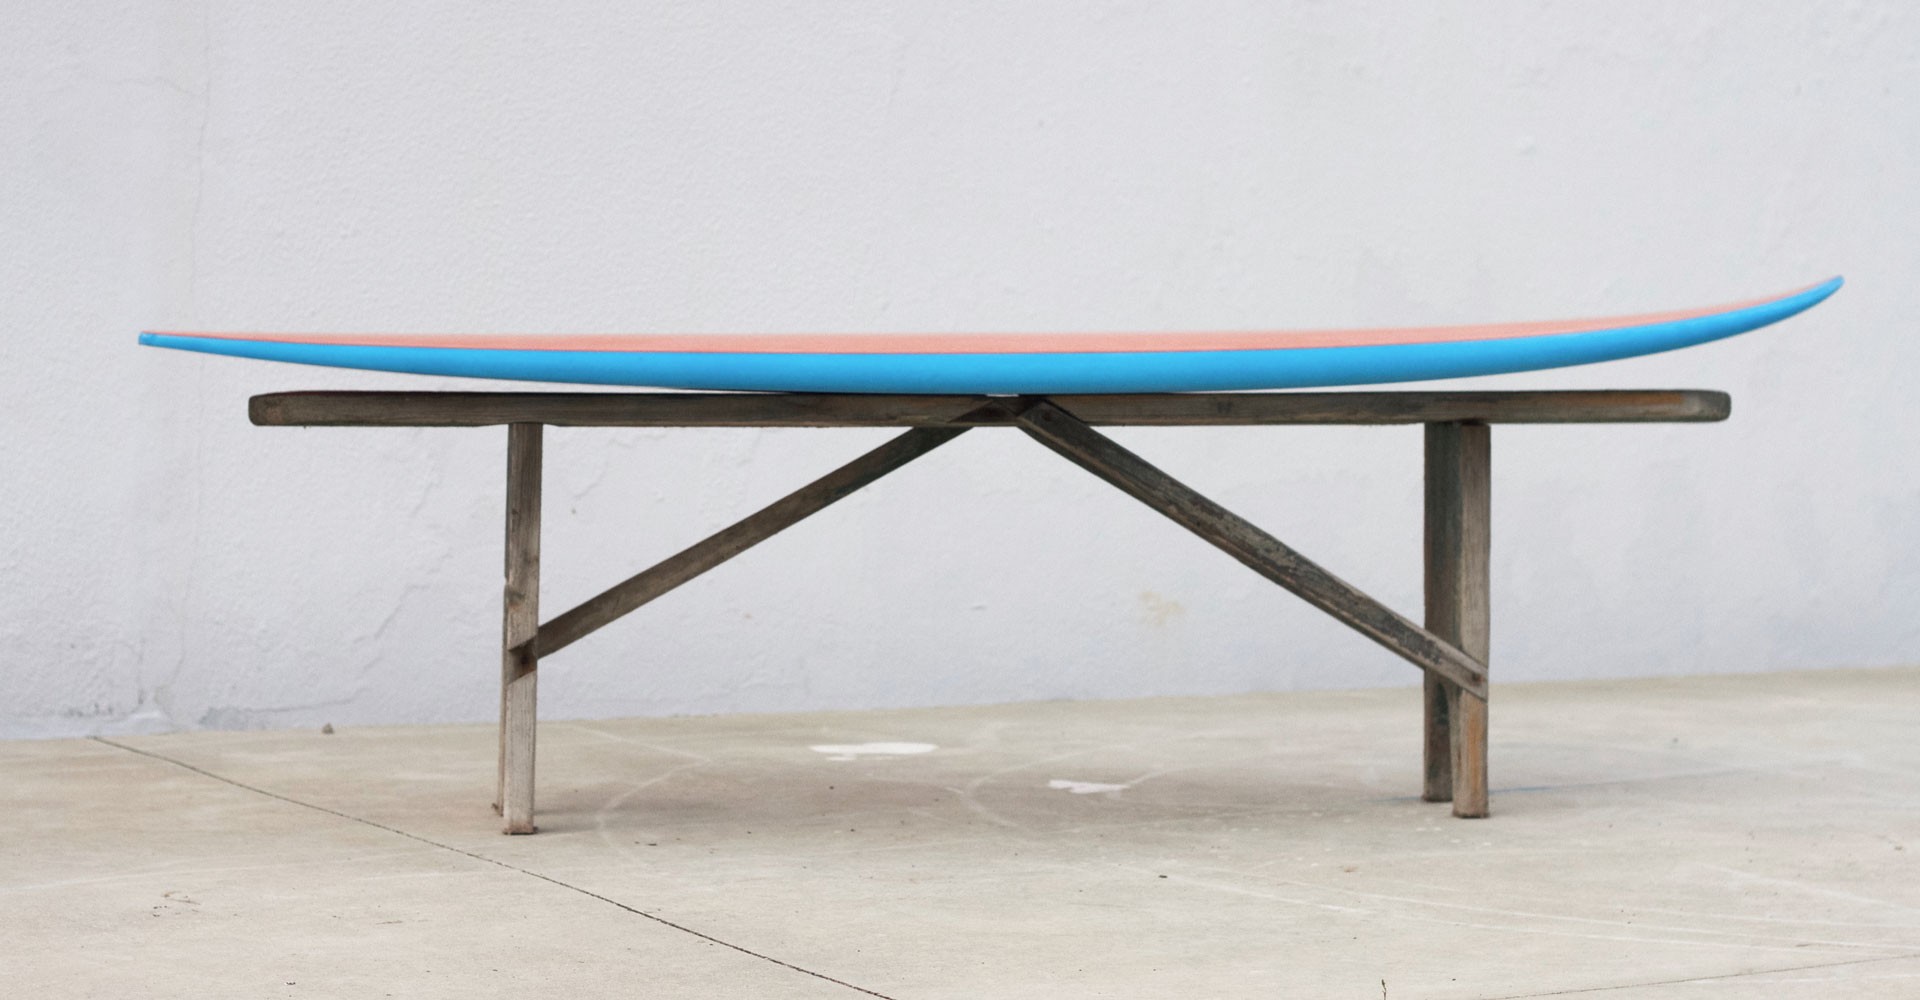 The Ovoo is a Mini Malibu surfboard version for surfing beginners and weekend surfers.